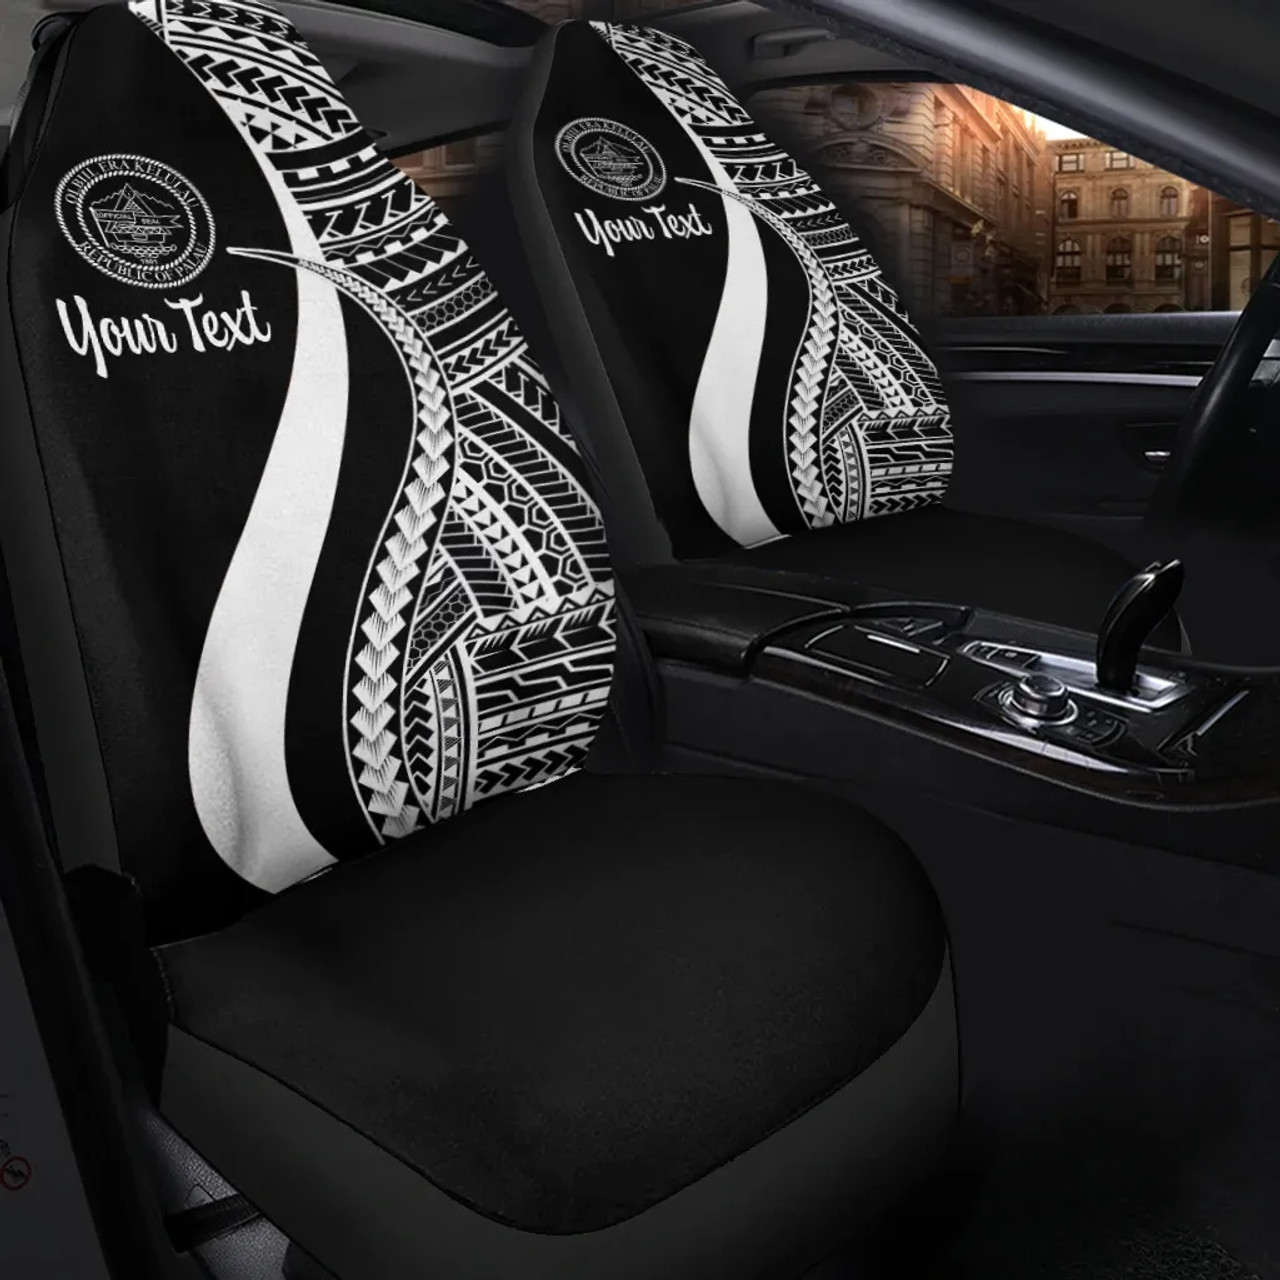 Palau Custom Personalised Car Seat Covers - White Polynesian Tentacle Tribal Pattern Crest